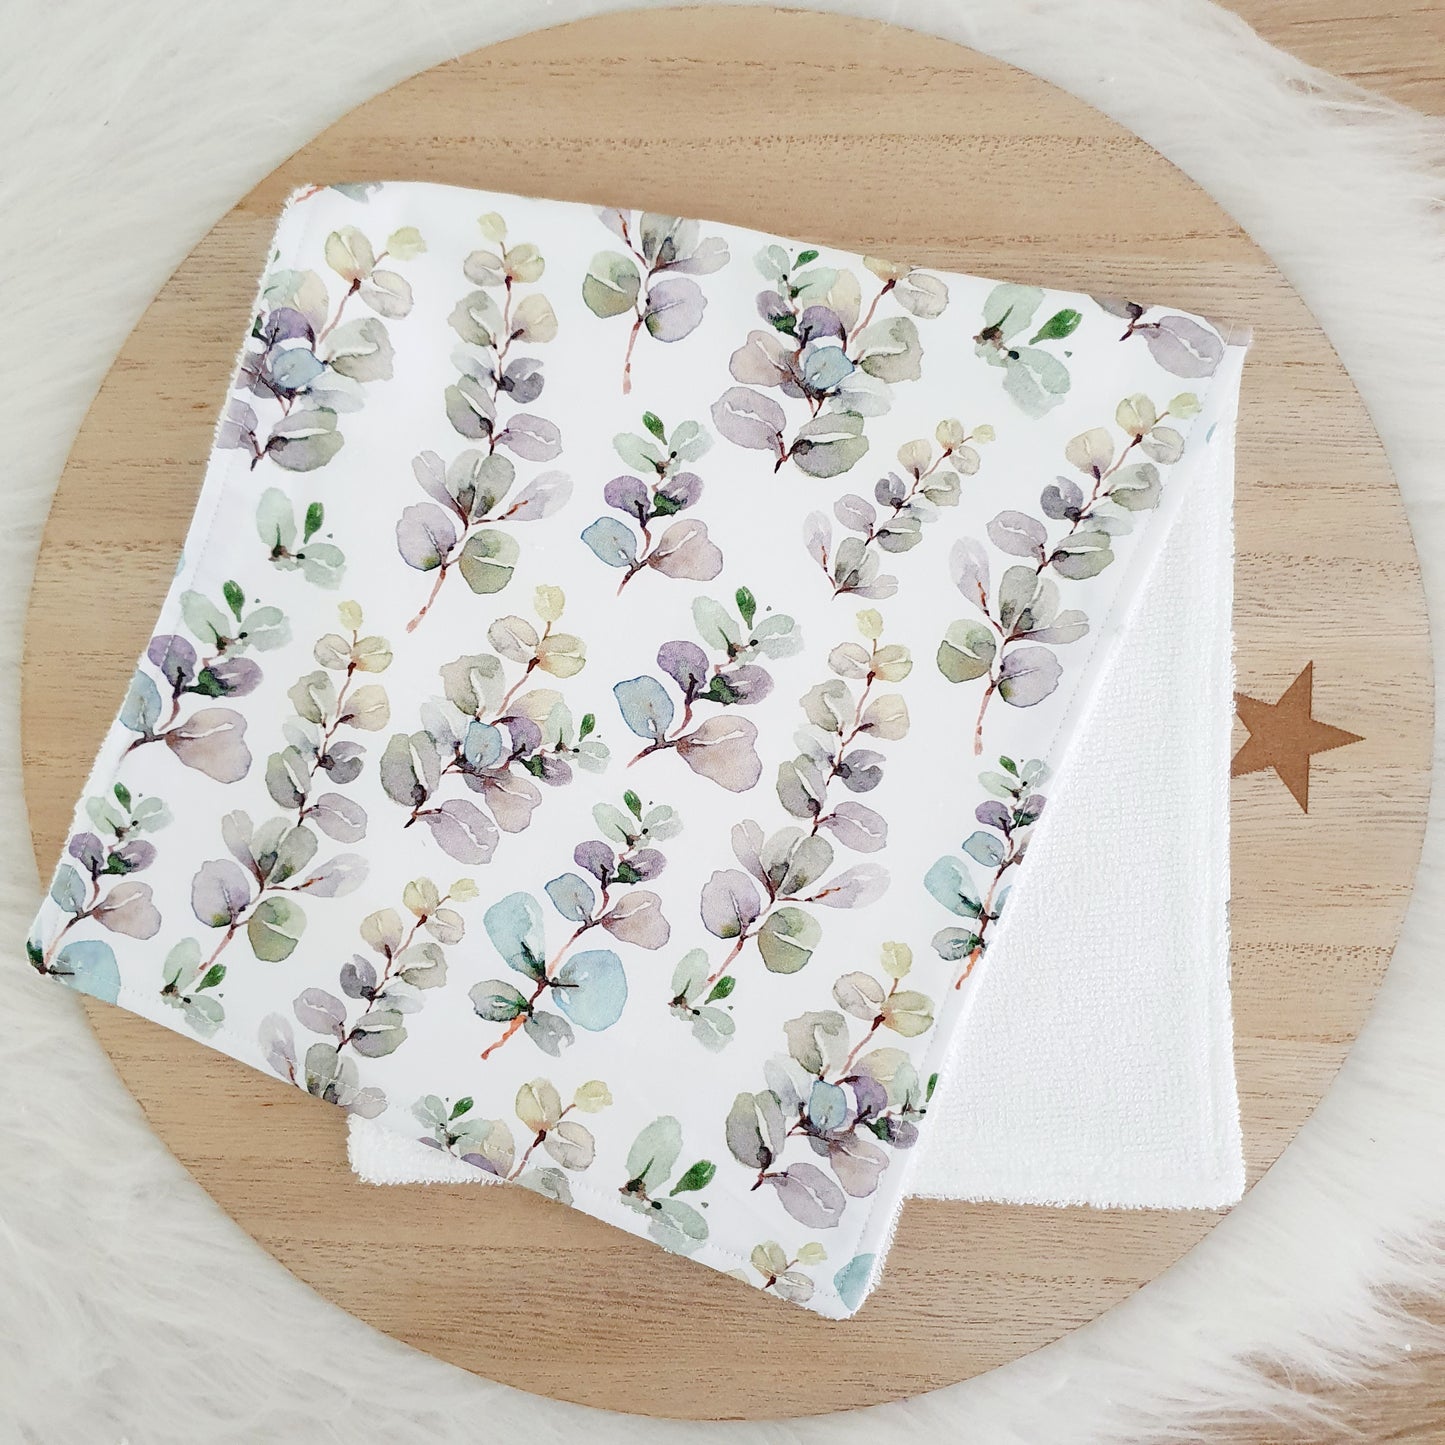 Burp Cloth | Baby Burp Cloths | Baby Shower Gift | Bamboo Backed Ultra Absorbent Towelling - SILVER GUM